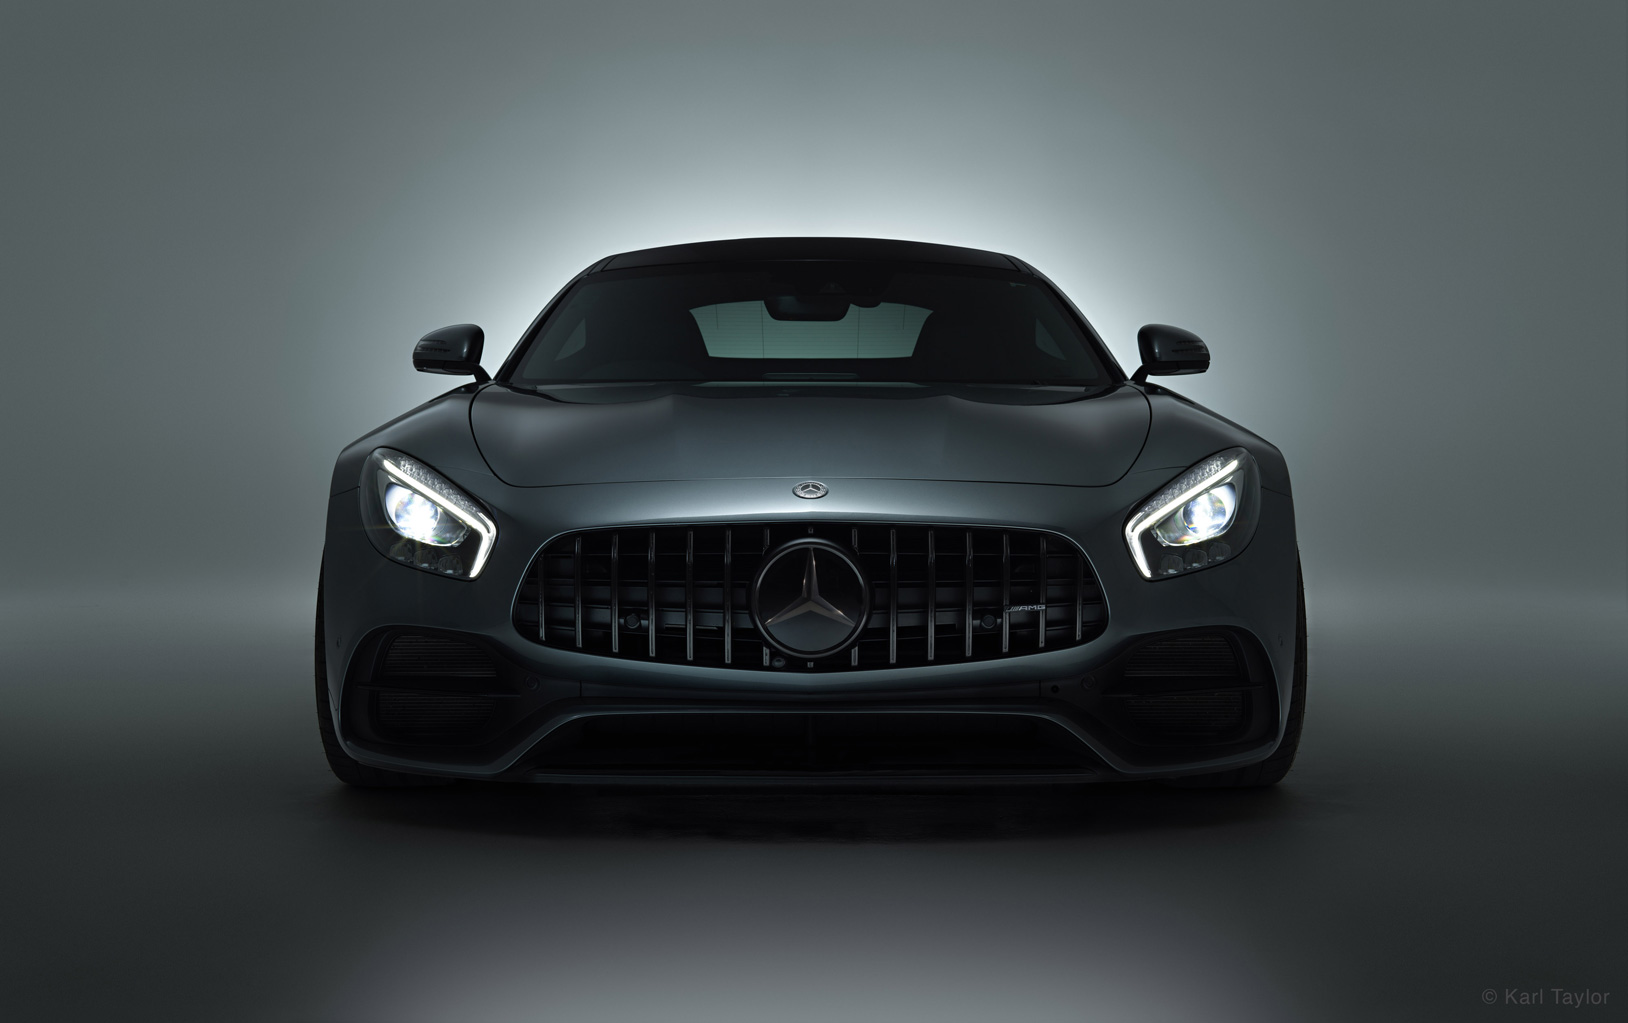 Mercedes AMG GT sports car front view